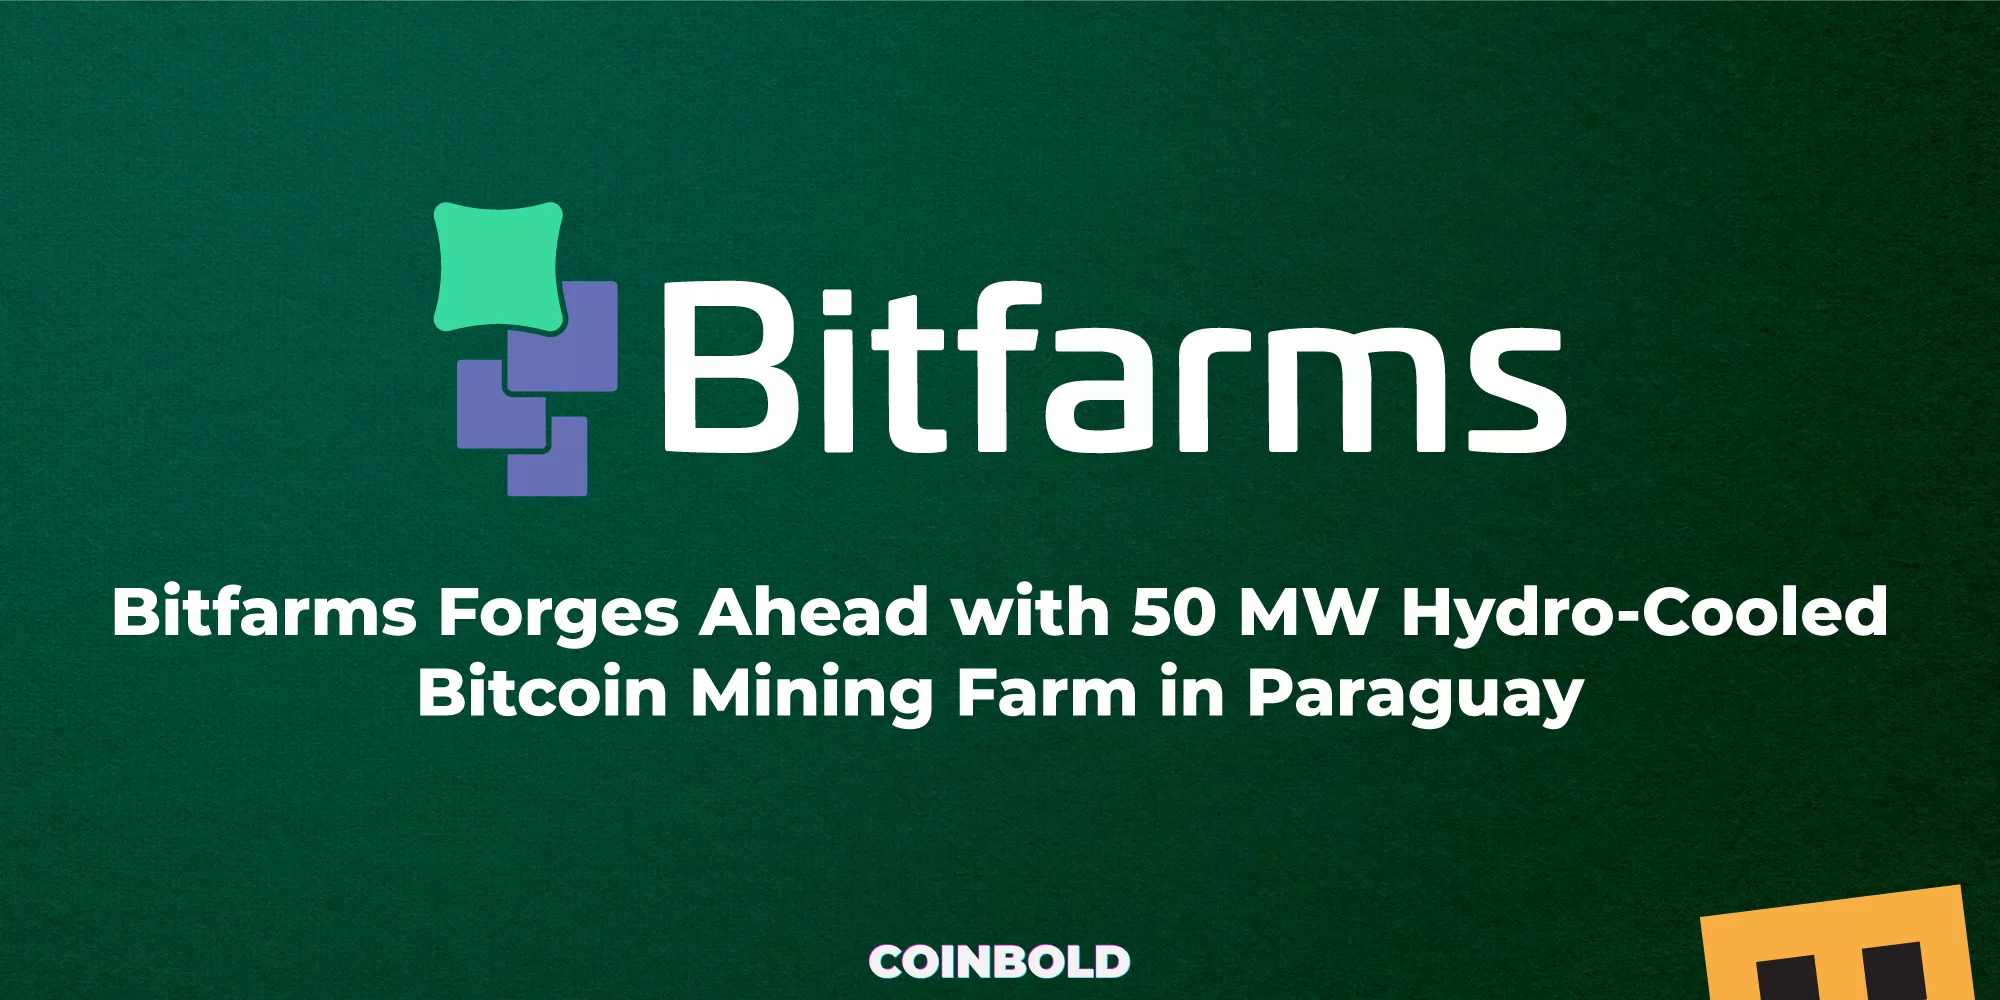 Bitfarms Forges Ahead with 50 MW Hydro Cooled Bitcoin Mining Farm in Paraguay